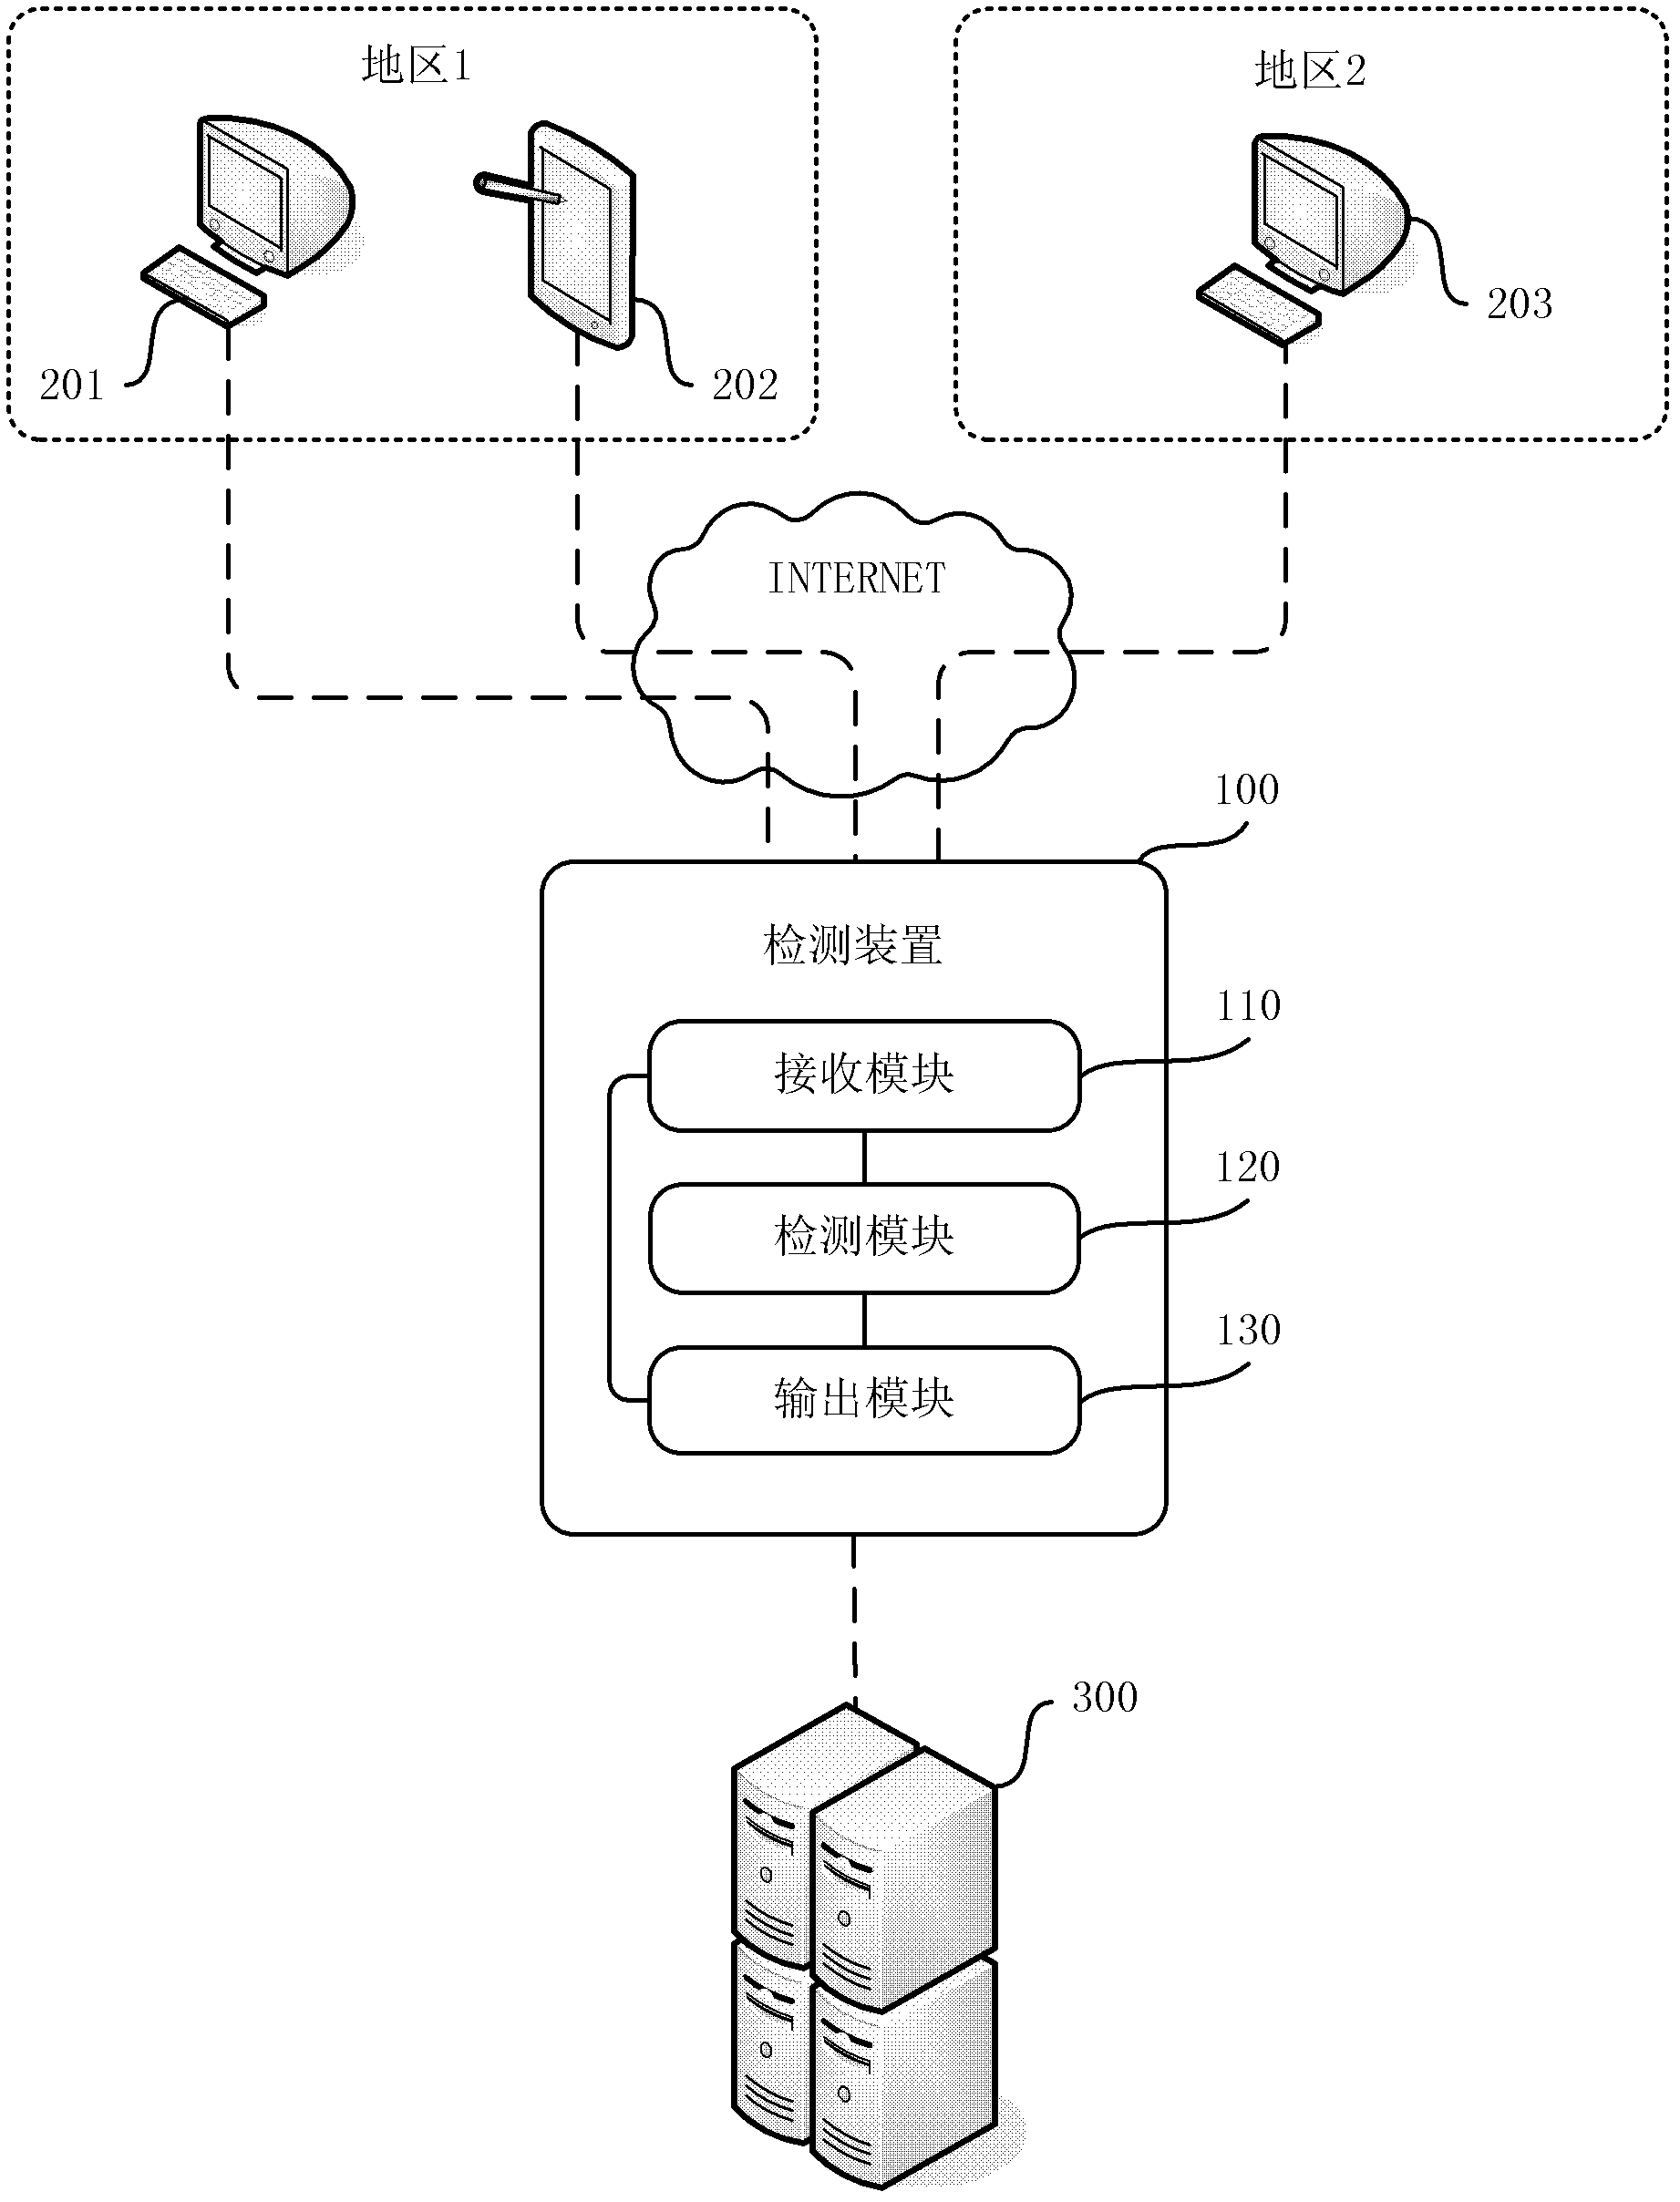 Abnormal login detecting method and device